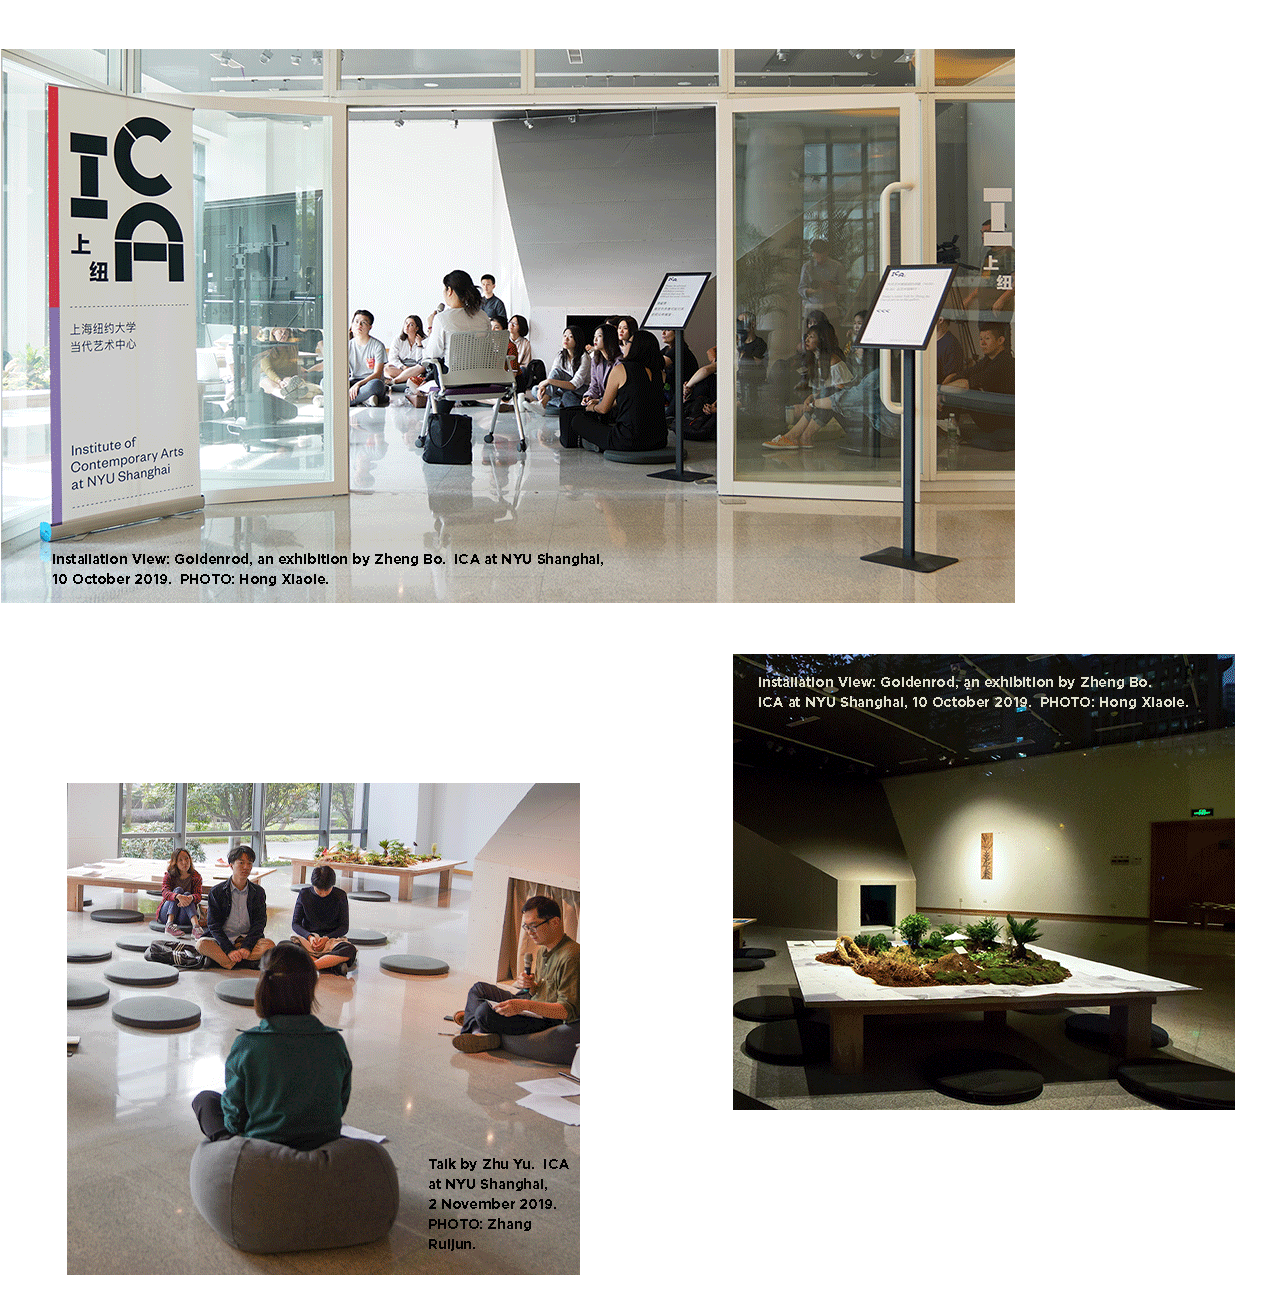 A collage of Images from NYU Shanghai's gallery space (clockwise): 1) The entrance to the ICA gallery, people are seated inside listening to a presentation. 2) A installation set up in the gallery, it is seen through the window of the gallery space at night. 3) Student seated on cushions on the ground of the gallery space, listening intently to a speaker.